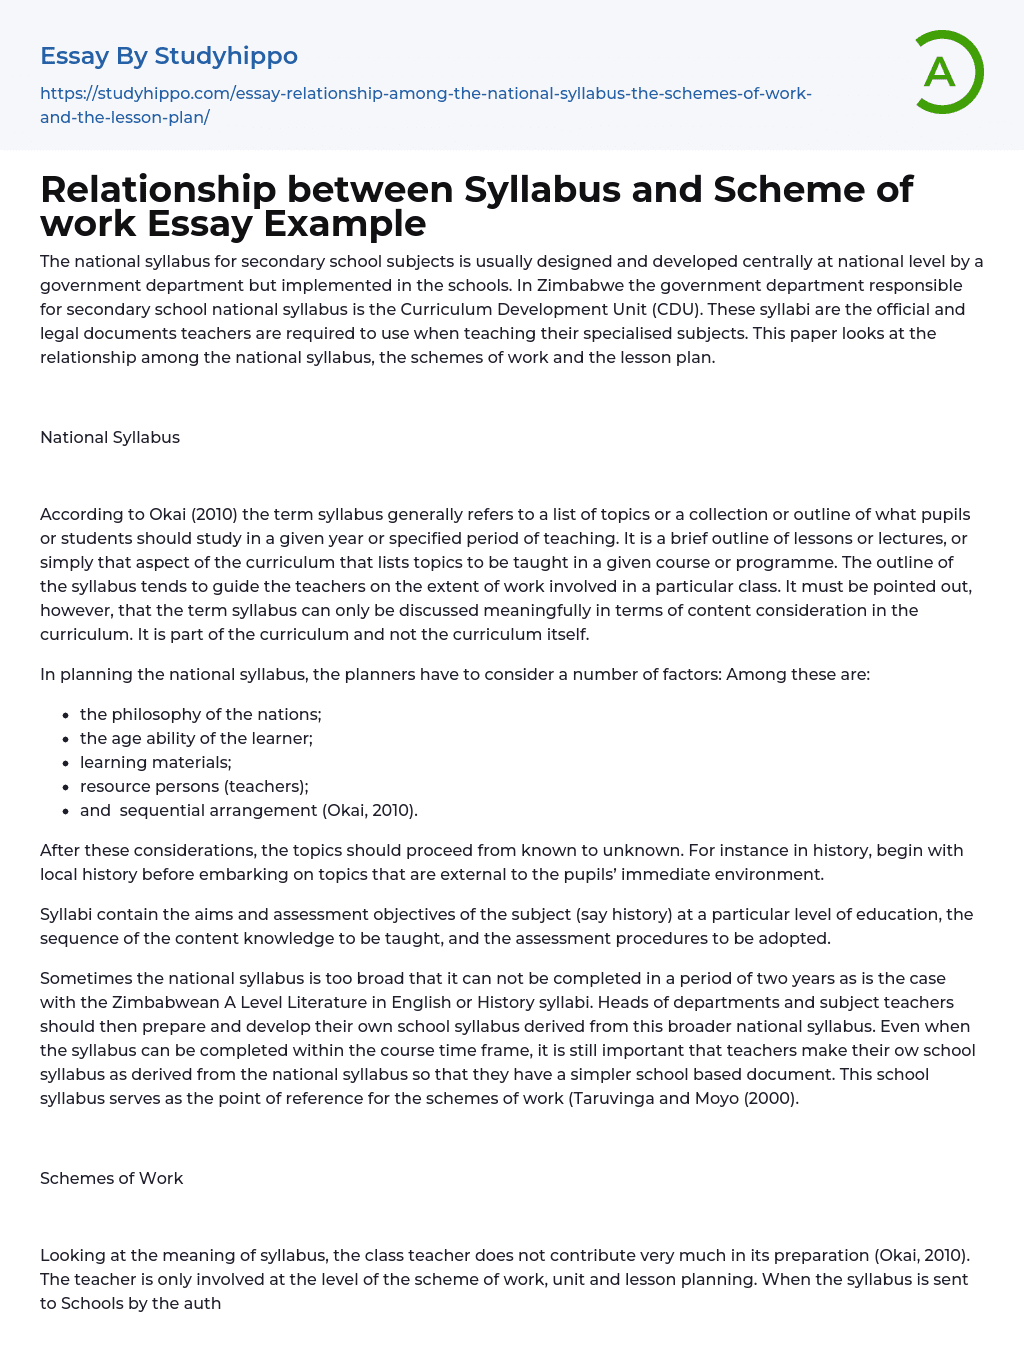 Relationship between Syllabus and Scheme of work Essay Example